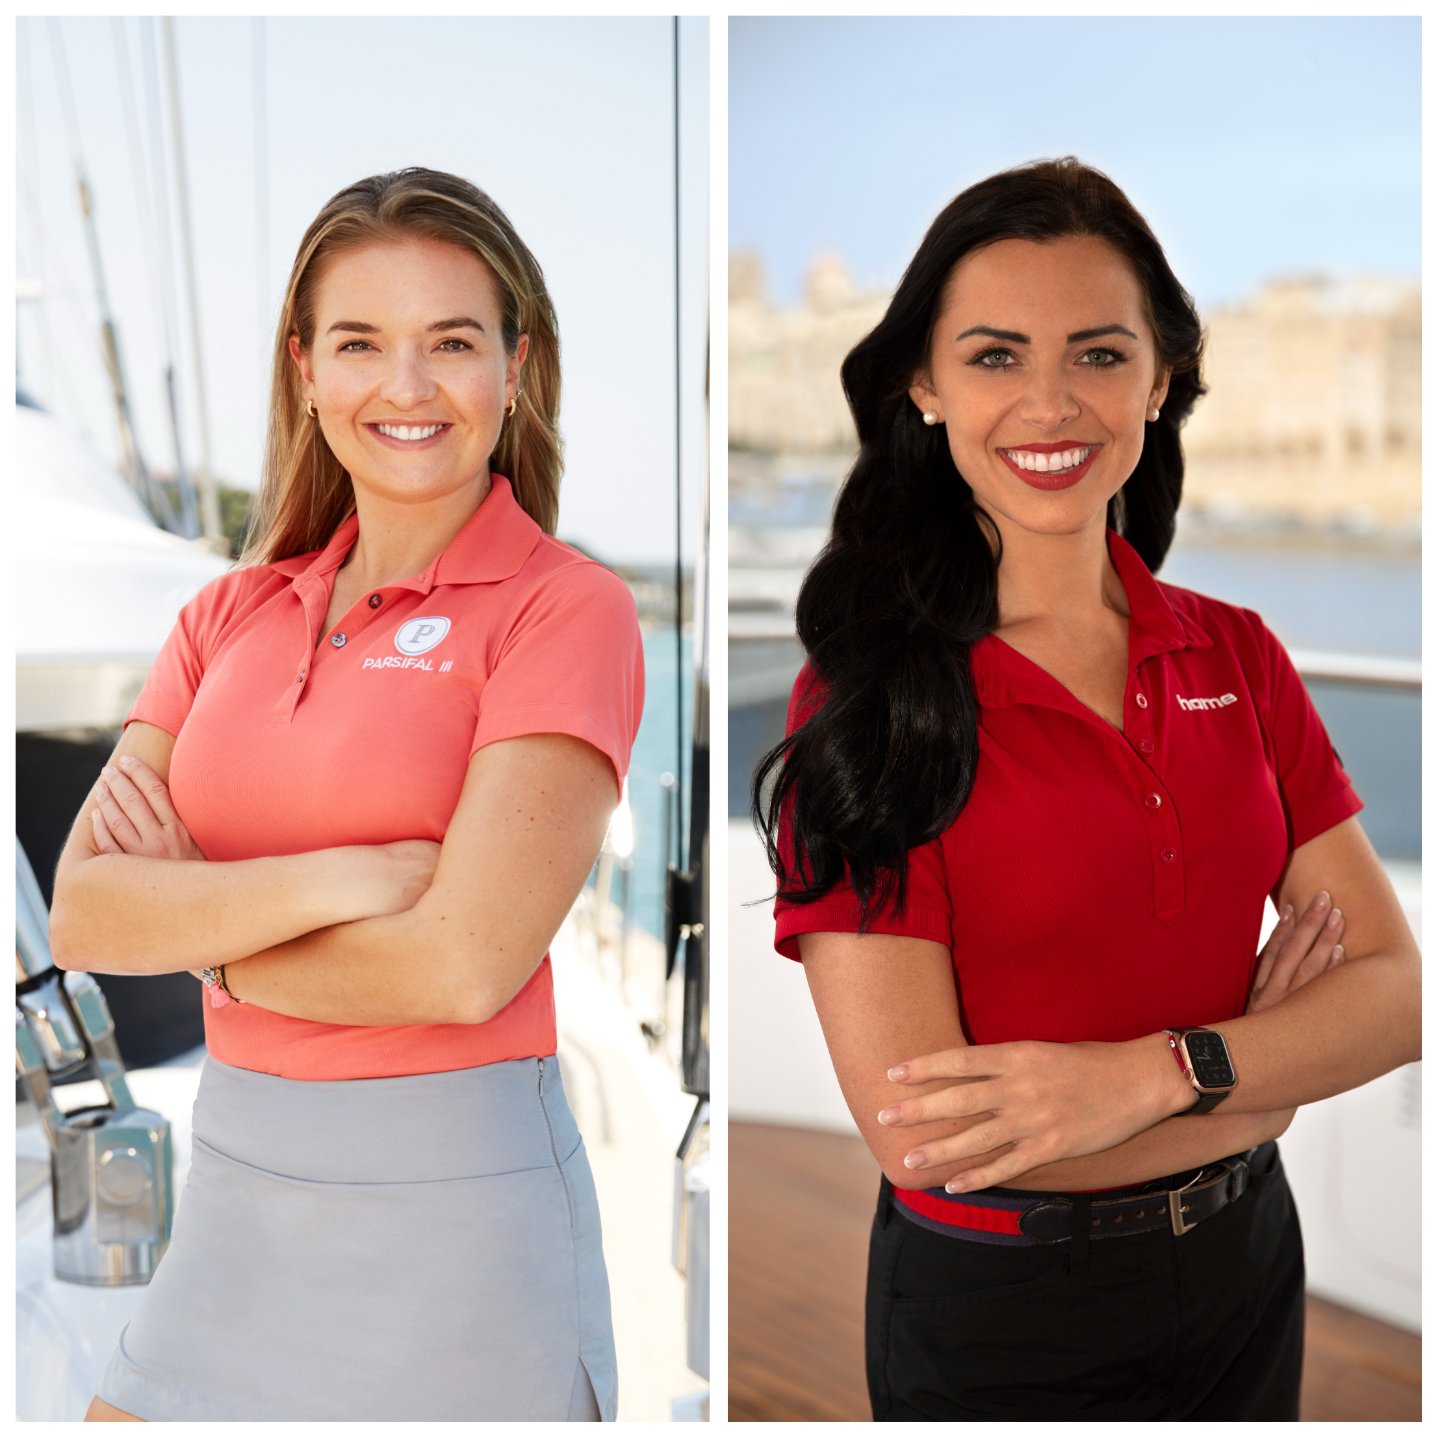 ‘Below Deck Med’: Daisy Kelliher Says Natasha Is ‘Hard to Watch’ – Why Some Viewers Struggle With This Season’s Chief Stew [Exclusive]